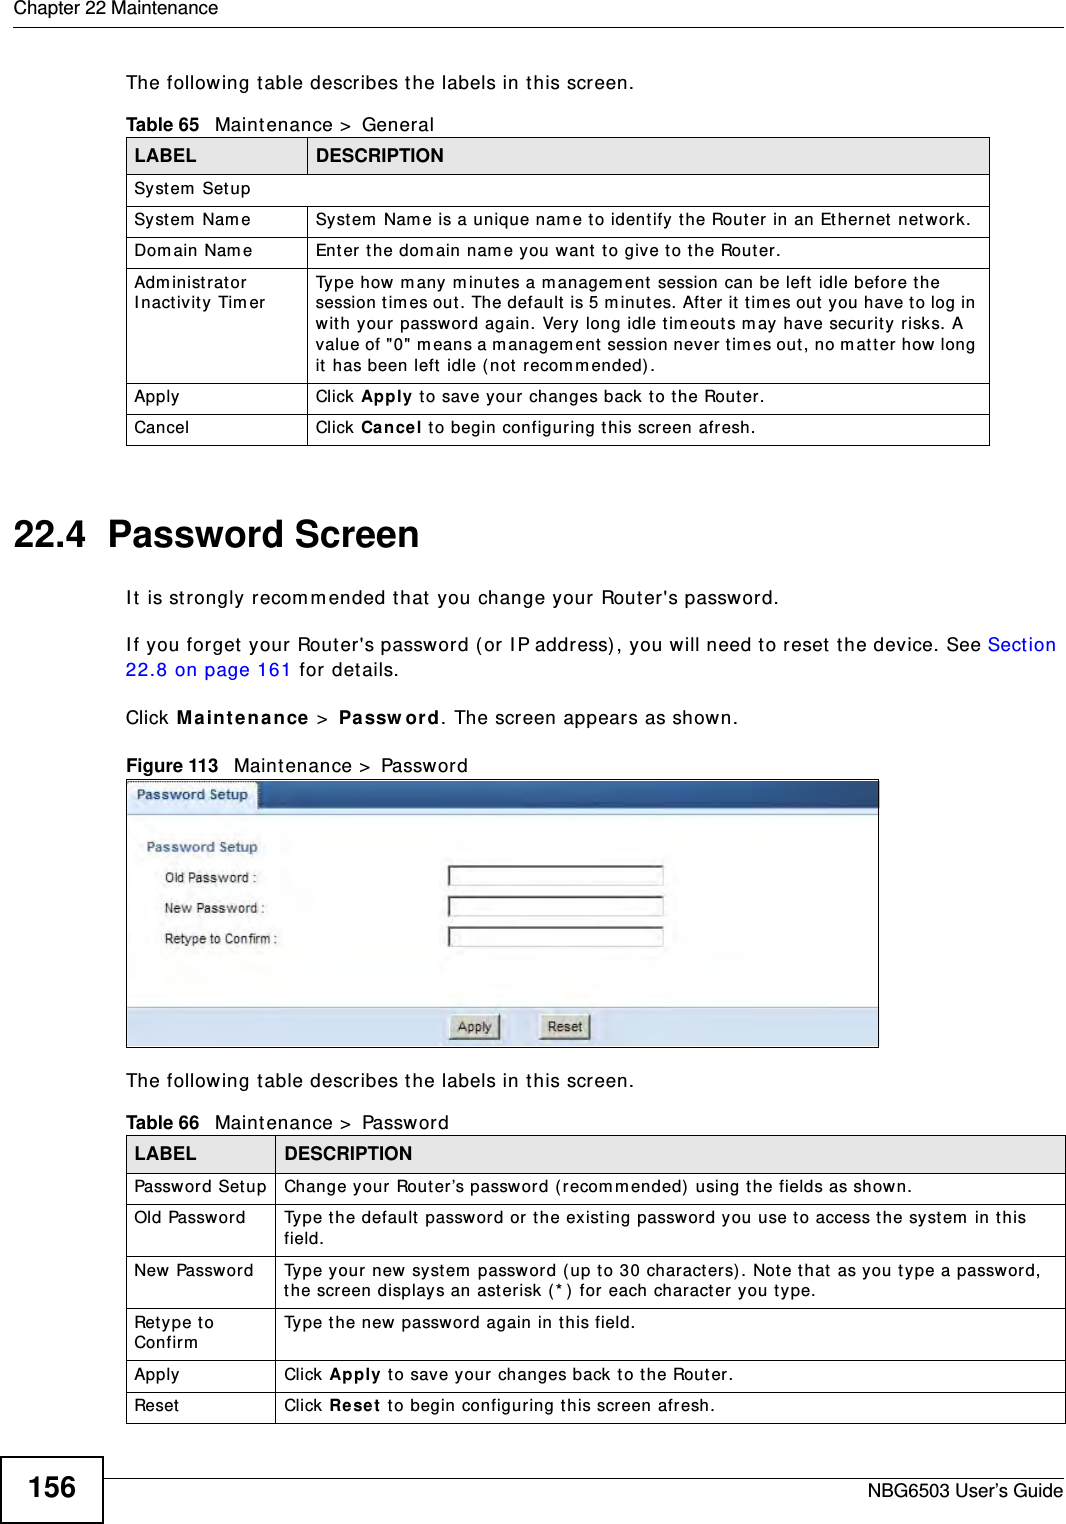 Chapter 22 MaintenanceNBG6503 User’s Guide156The following table describes the labels in this screen.22.4  Password ScreenIt is strongly recommended that you change your Router&apos;s password. If you forget your Router&apos;s password (or IP address), you will need to reset the device. See Section 22.8 on page 161 for details.Click Maintenance &gt; Password. The screen appears as shown.Figure 113   Maintenance &gt; Password The following table describes the labels in this screen.Table 65   Maintenance &gt; GeneralLABEL DESCRIPTIONSystem SetupSystem Name System Name is a unique name to identify the Router in an Ethernet network.Domain Name Enter the domain name you want to give to the Router.Administrator Inactivity Timer Type how many minutes a management session can be left idle before the session times out. The default is 5 minutes. After it times out you have to log in with your password again. Very long idle timeouts may have security risks. A value of &quot;0&quot; means a management session never times out, no matter how long it has been left idle (not recommended).Apply Click Apply to save your changes back to the Router.Cancel Click Cancel to begin configuring this screen afresh.Table 66   Maintenance &gt; PasswordLABEL DESCRIPTIONPassword Setup Change your Router’s password (recommended) using the fields as shown.Old Password Type the default password or the existing password you use to access the system in this field.New Password Type your new system password (up to 30 characters). Note that as you type a password, the screen displays an asterisk (*) for each character you type.Retype to Confirm Type the new password again in this field.Apply Click Apply to save your changes back to the Router.Reset Click Reset to begin configuring this screen afresh.